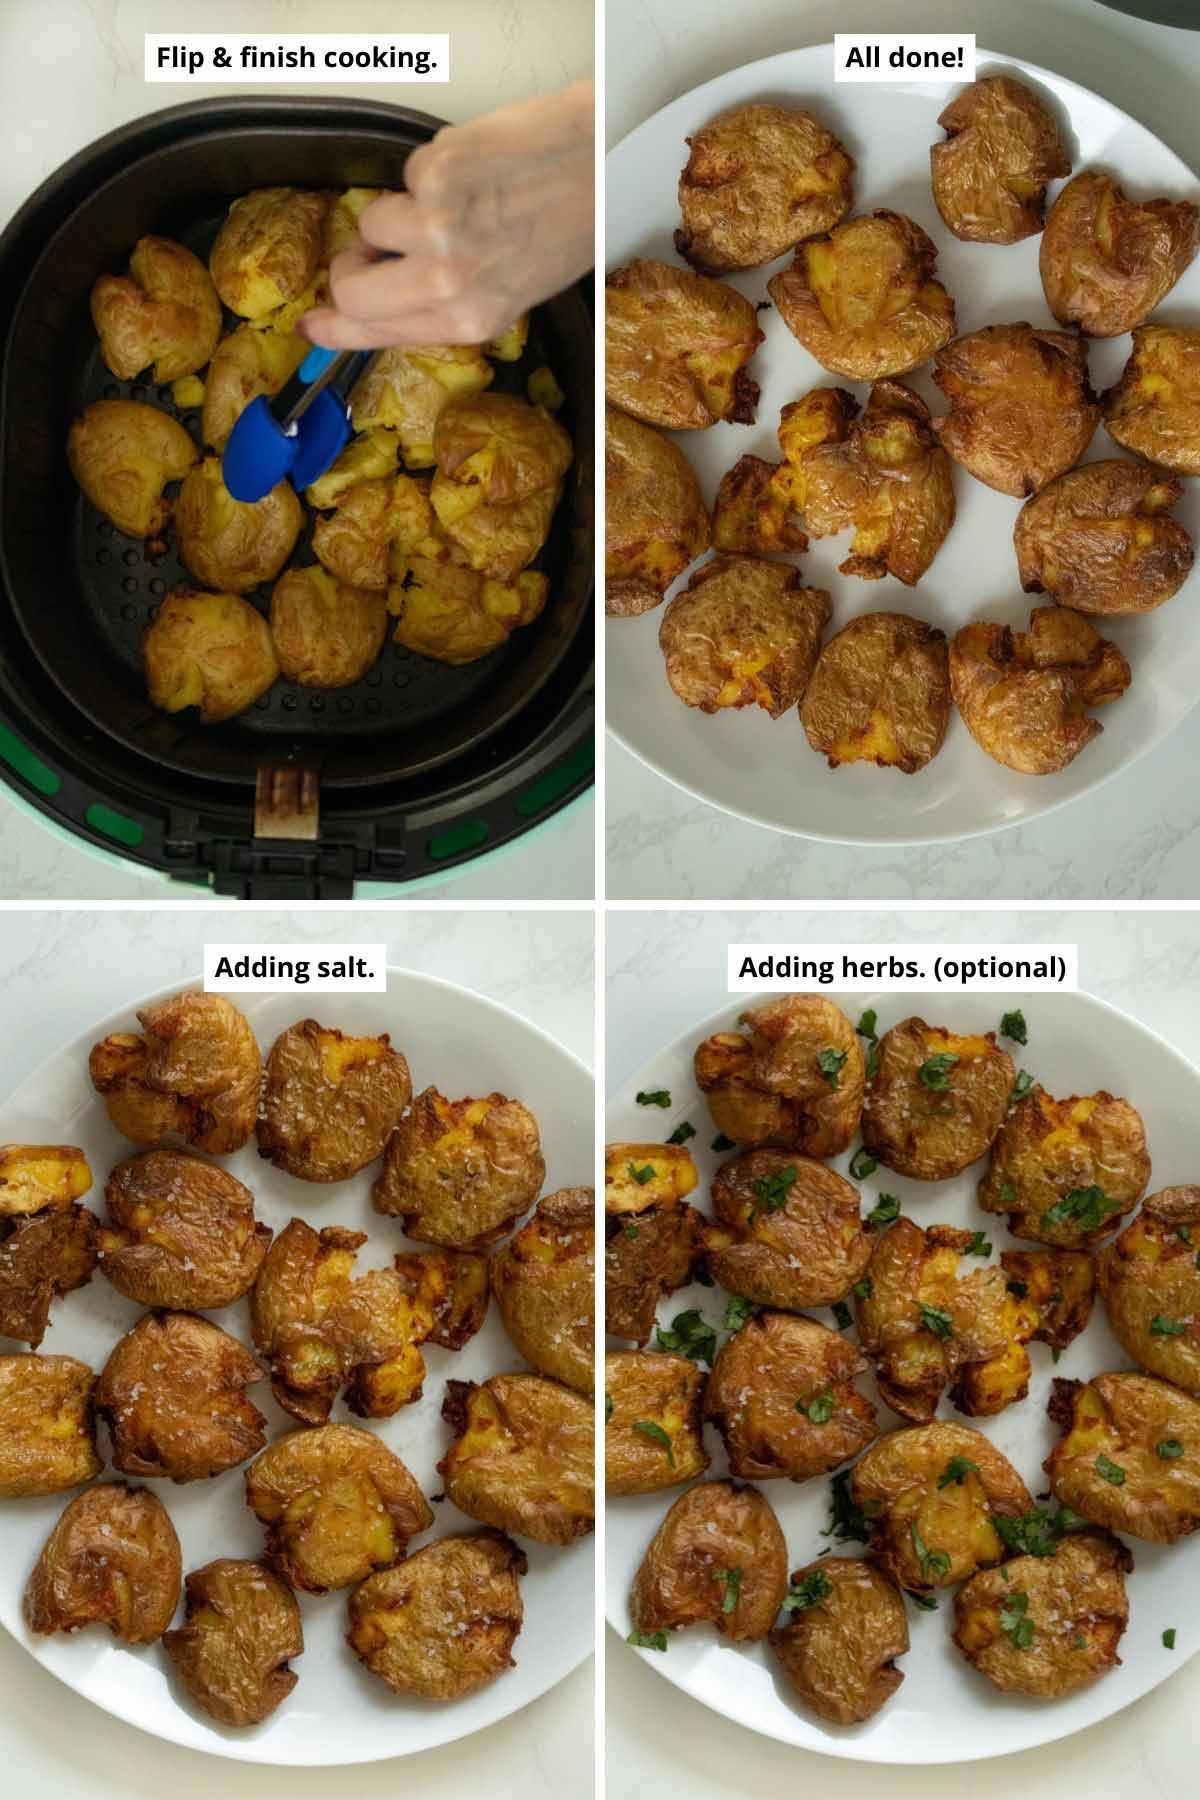 image collage showing flipping smashed potatoes in the air fryer, and the cooked potatoes on a plate after cooking, after adding sea salt, and after sprinkling on fresh herbs